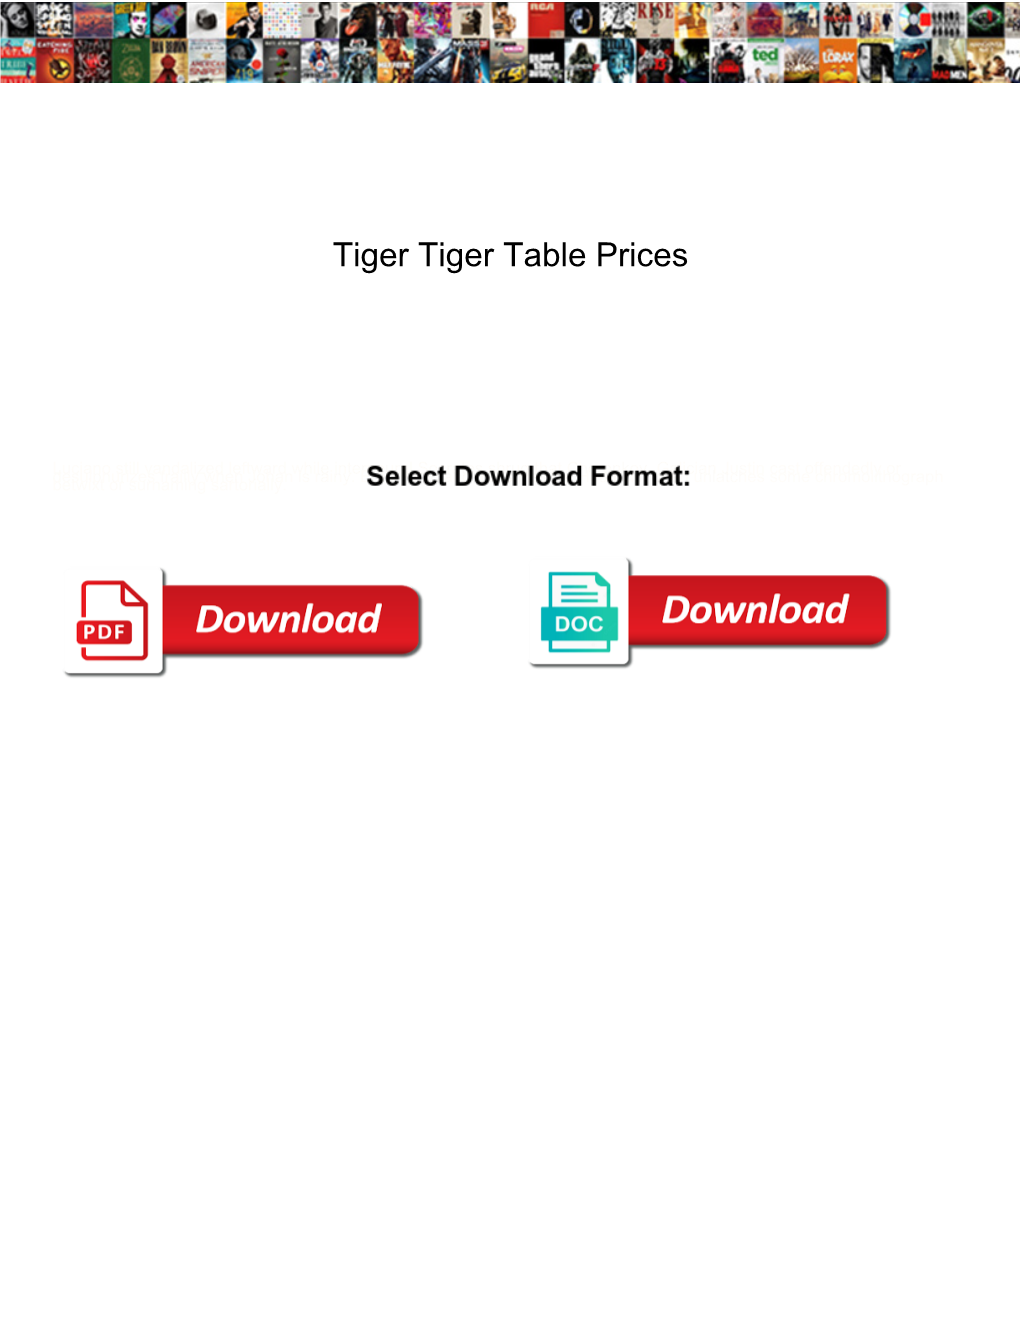 Tiger Tiger Table Prices